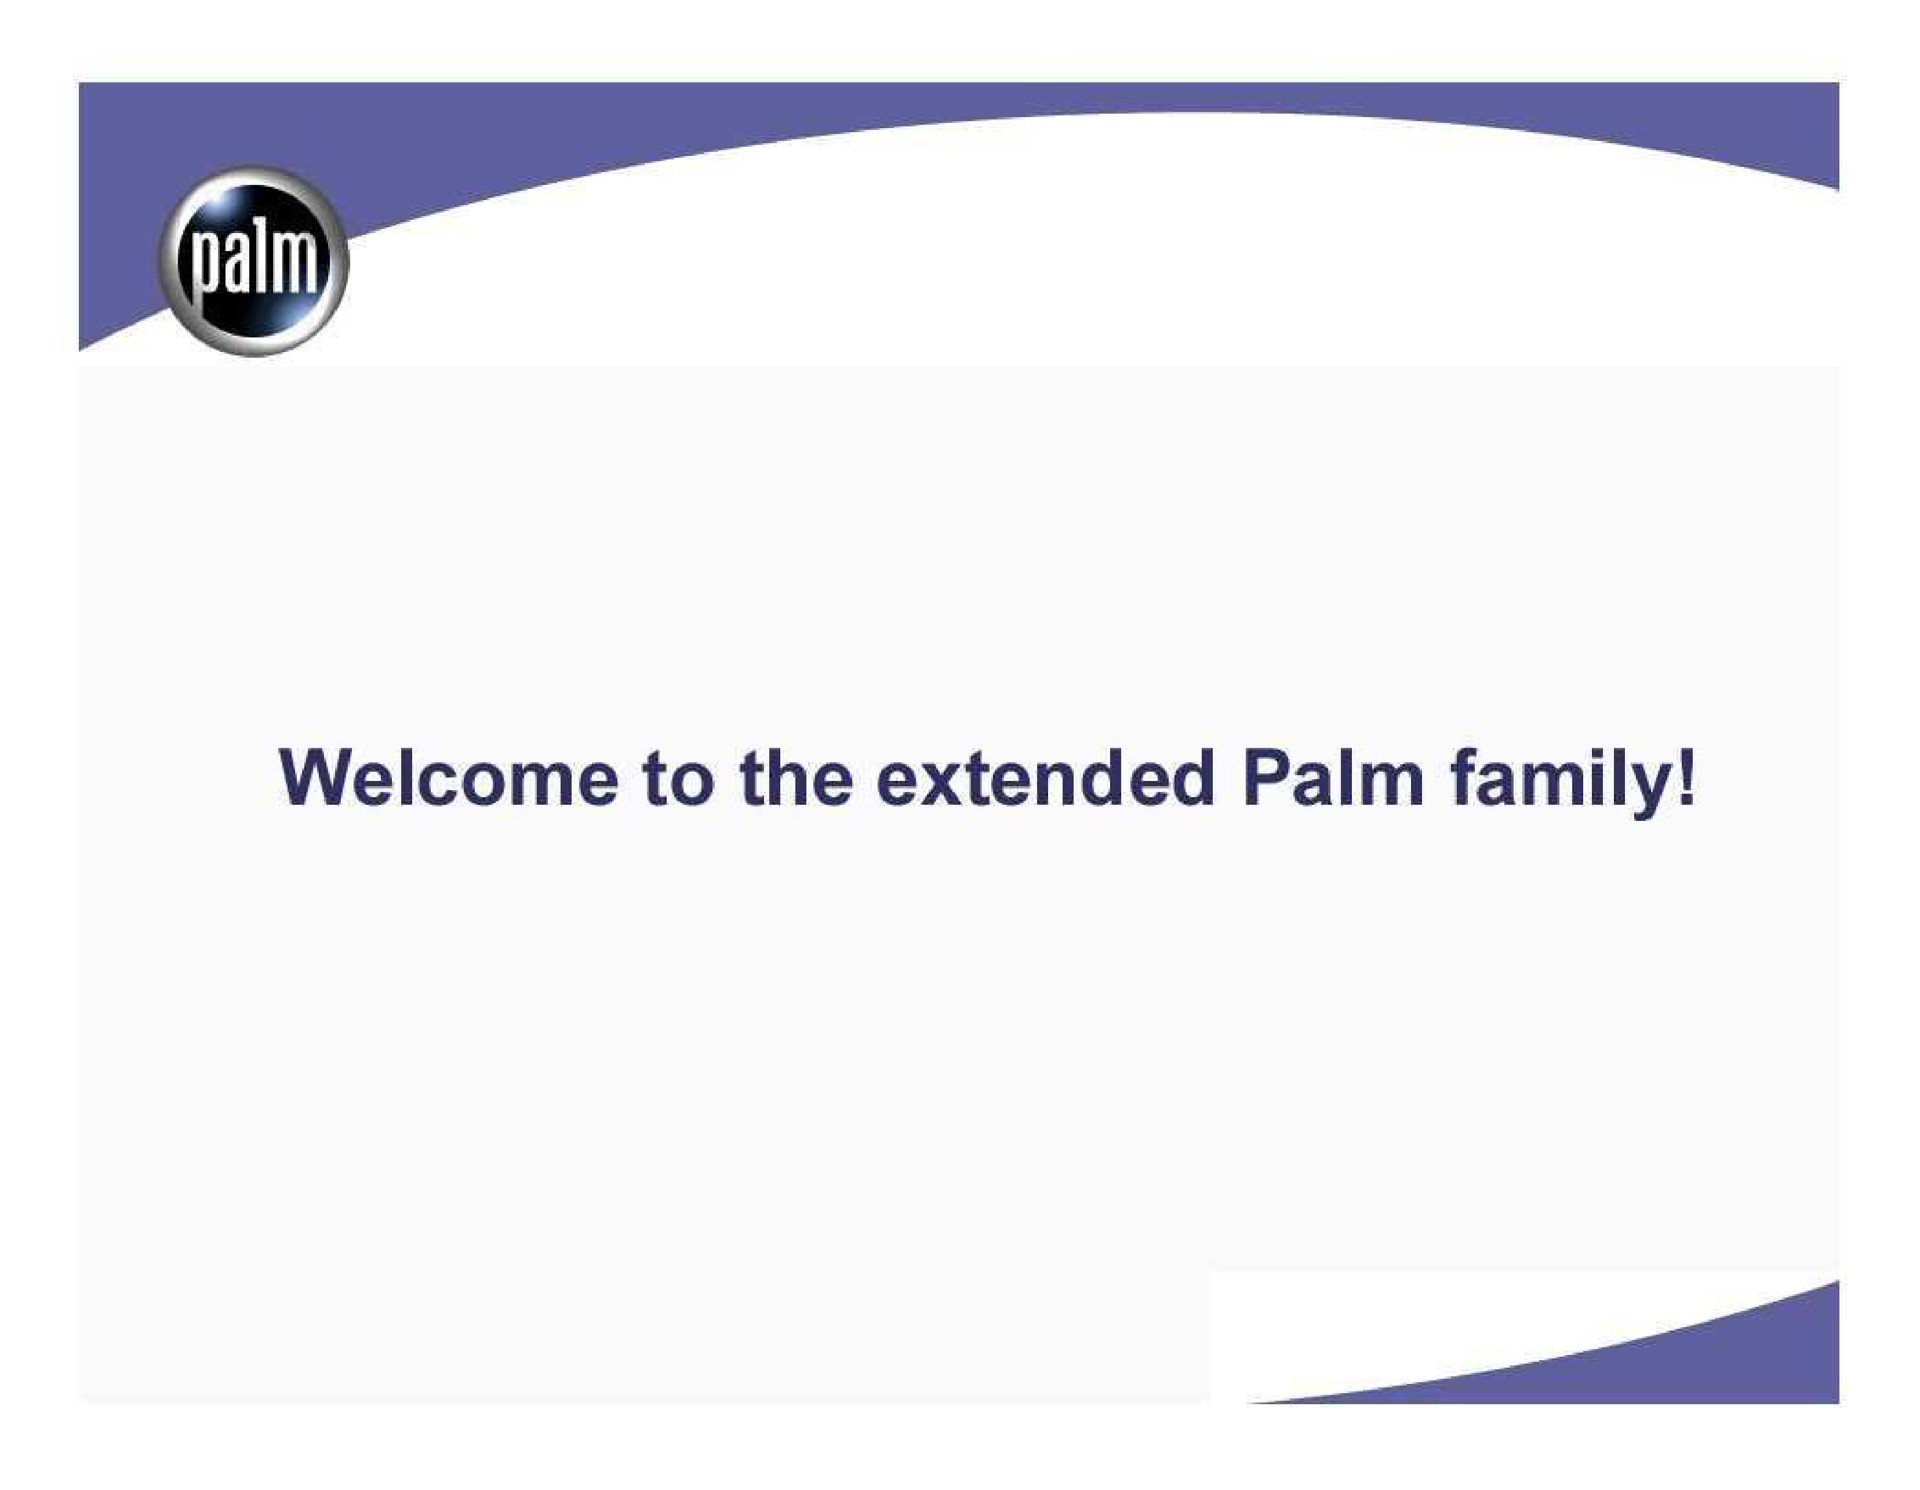 welcome to the extended palm family | Palm Inc.